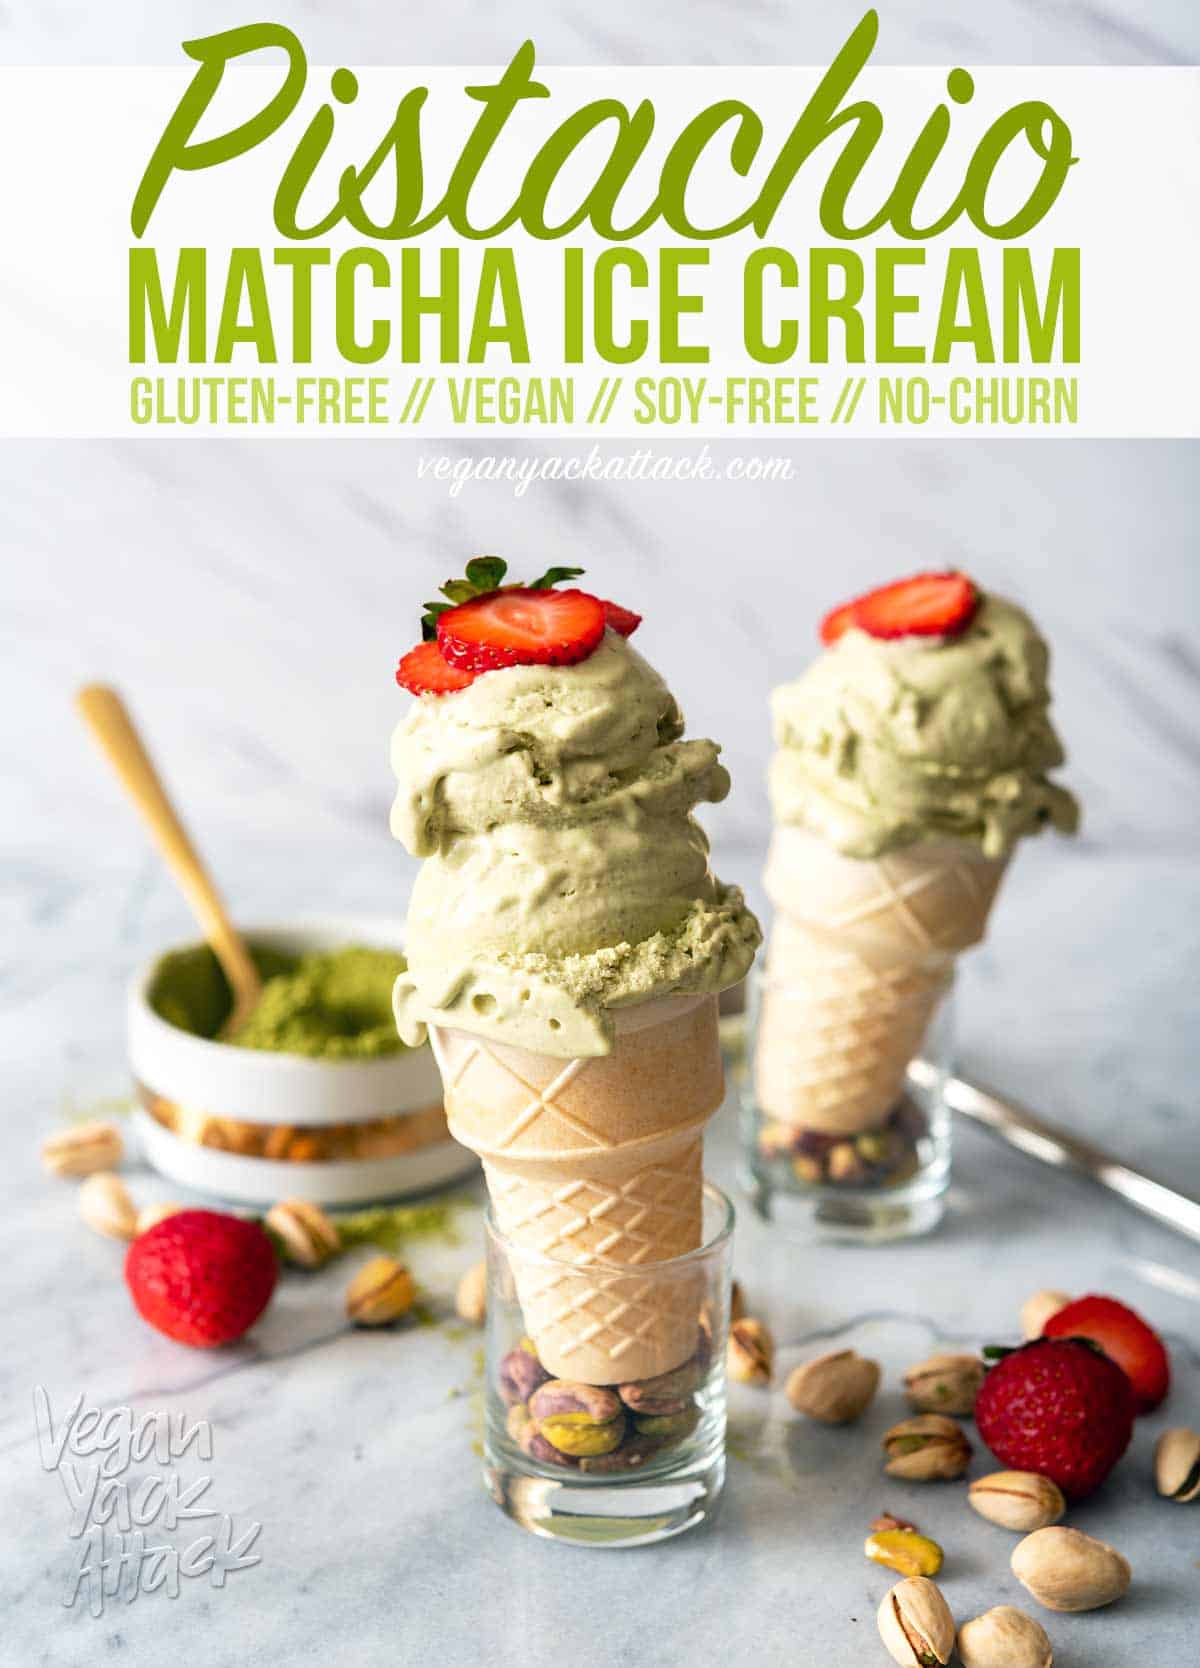 Image of two cones of pistachio matcha ice cream on a marble counter top